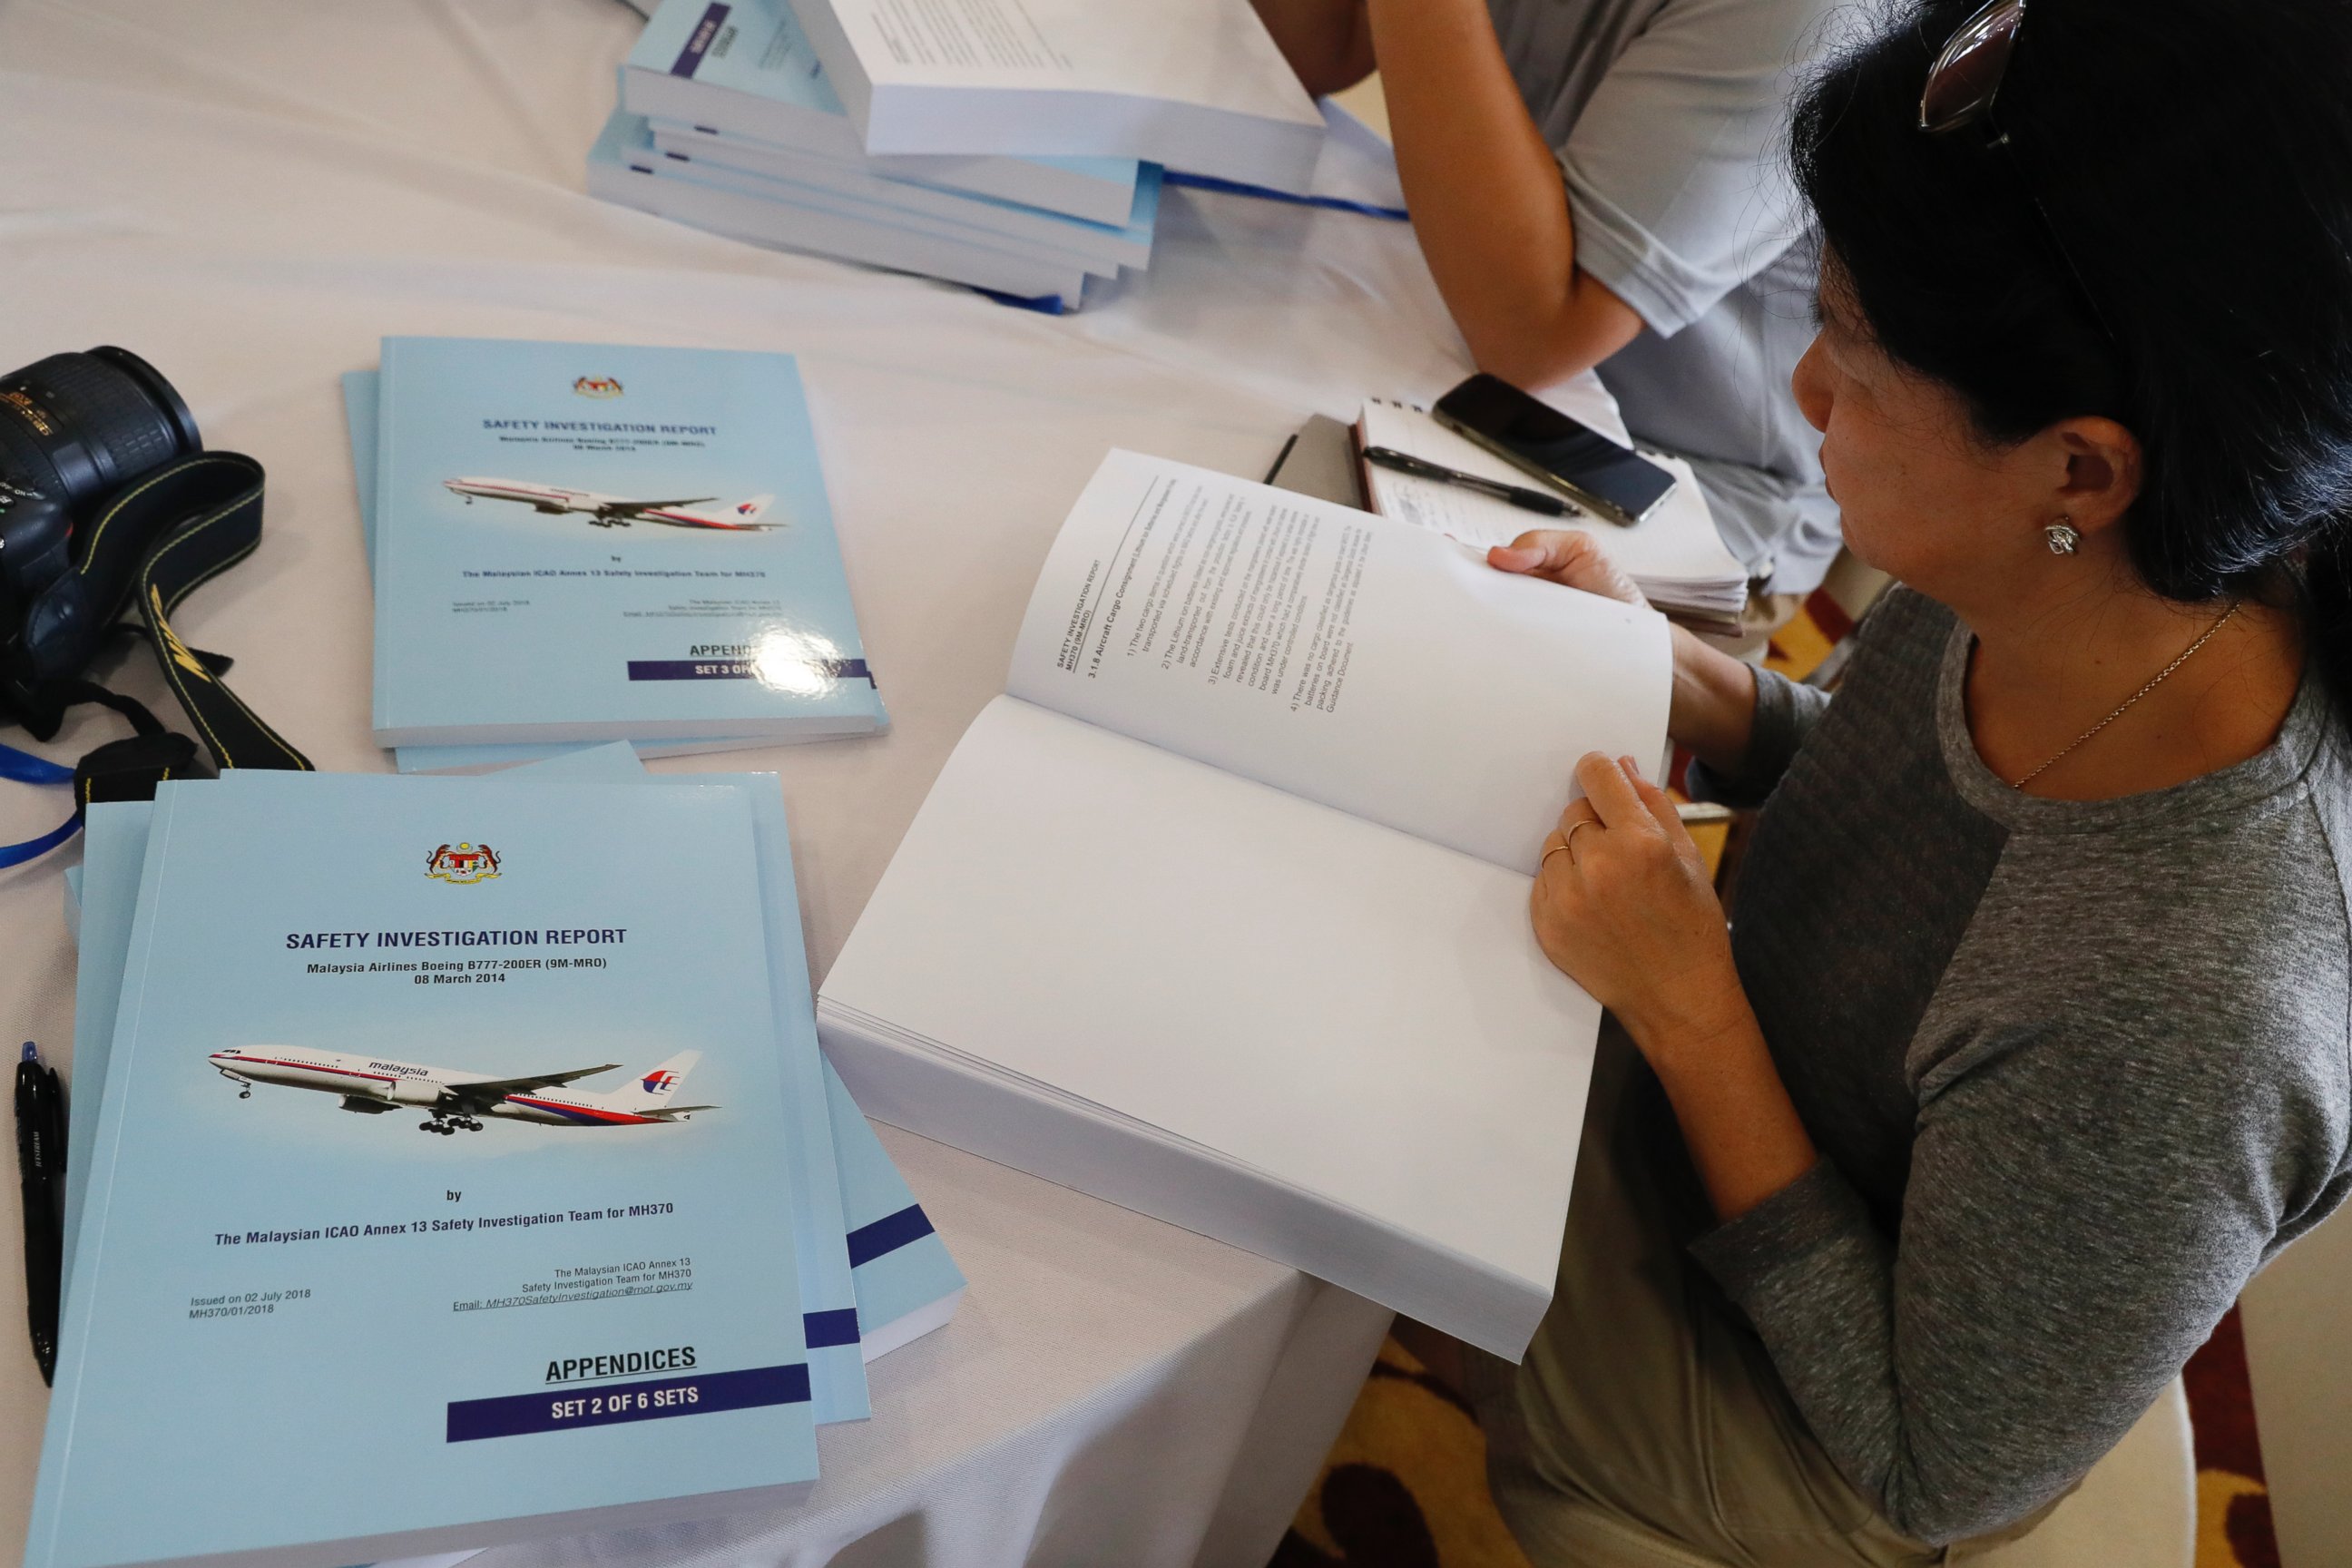 Copies of the final investigation report on missing flight MH370 are offered to the media in Putrajaya, Monday, July 30, 2018.